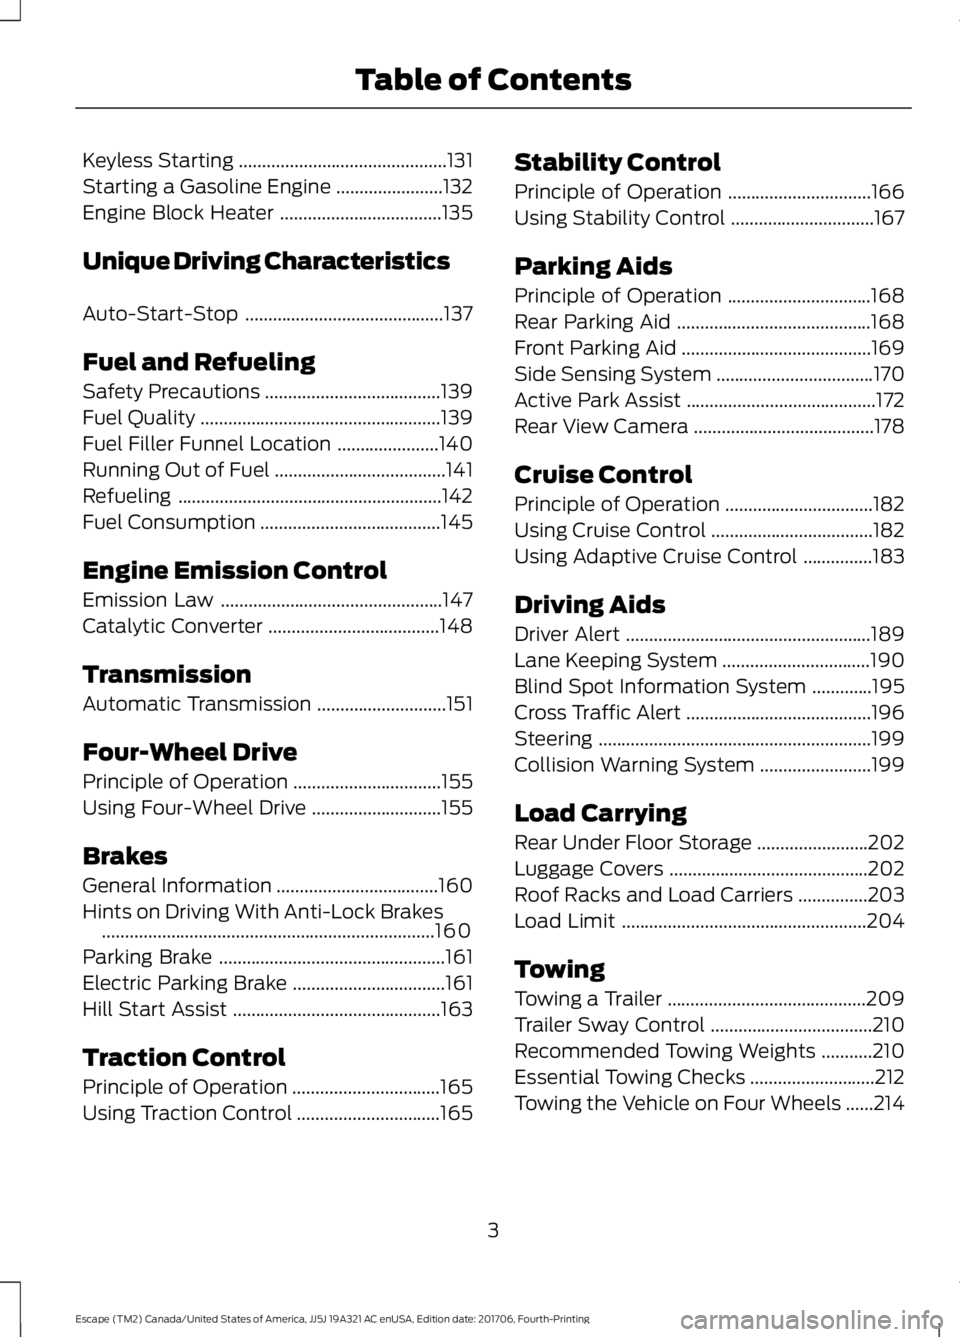 FORD ESCAPE 2018  Owners Manual Keyless Starting
.............................................131
Starting a Gasoline Engine .......................
132
Engine Block Heater ...................................
135
Unique Driving Char